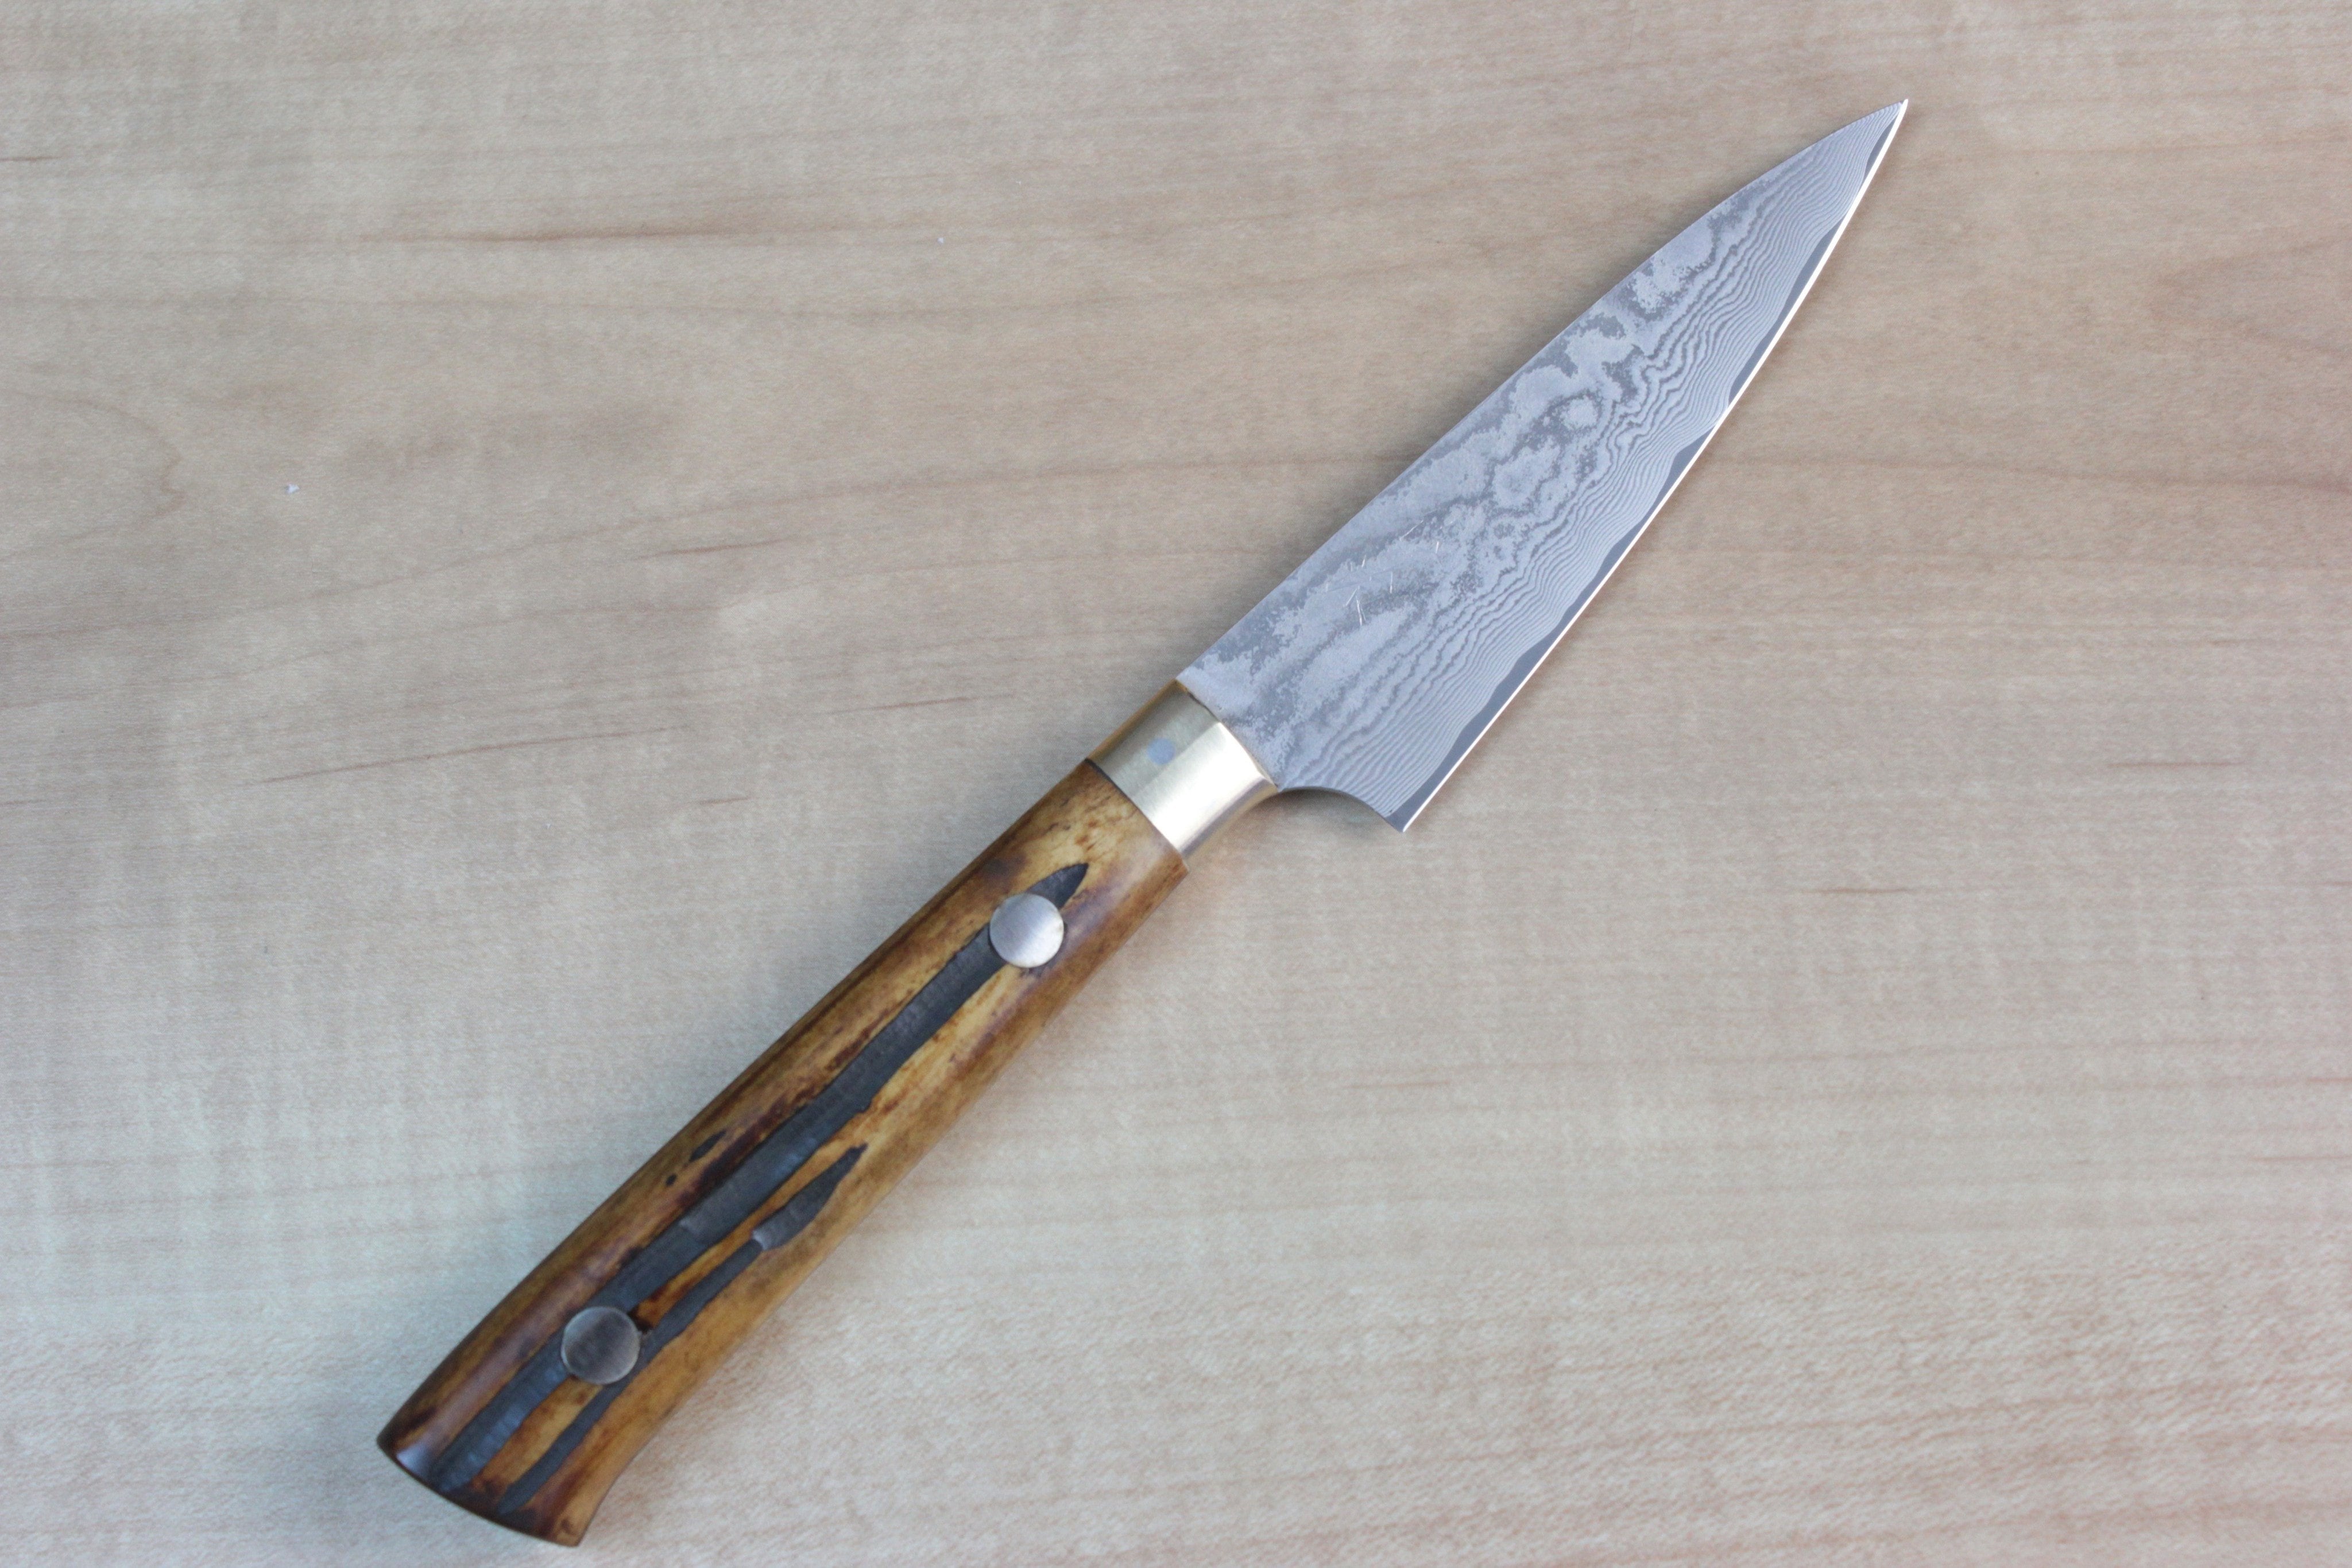 Paring Knife, 3.5 Inch